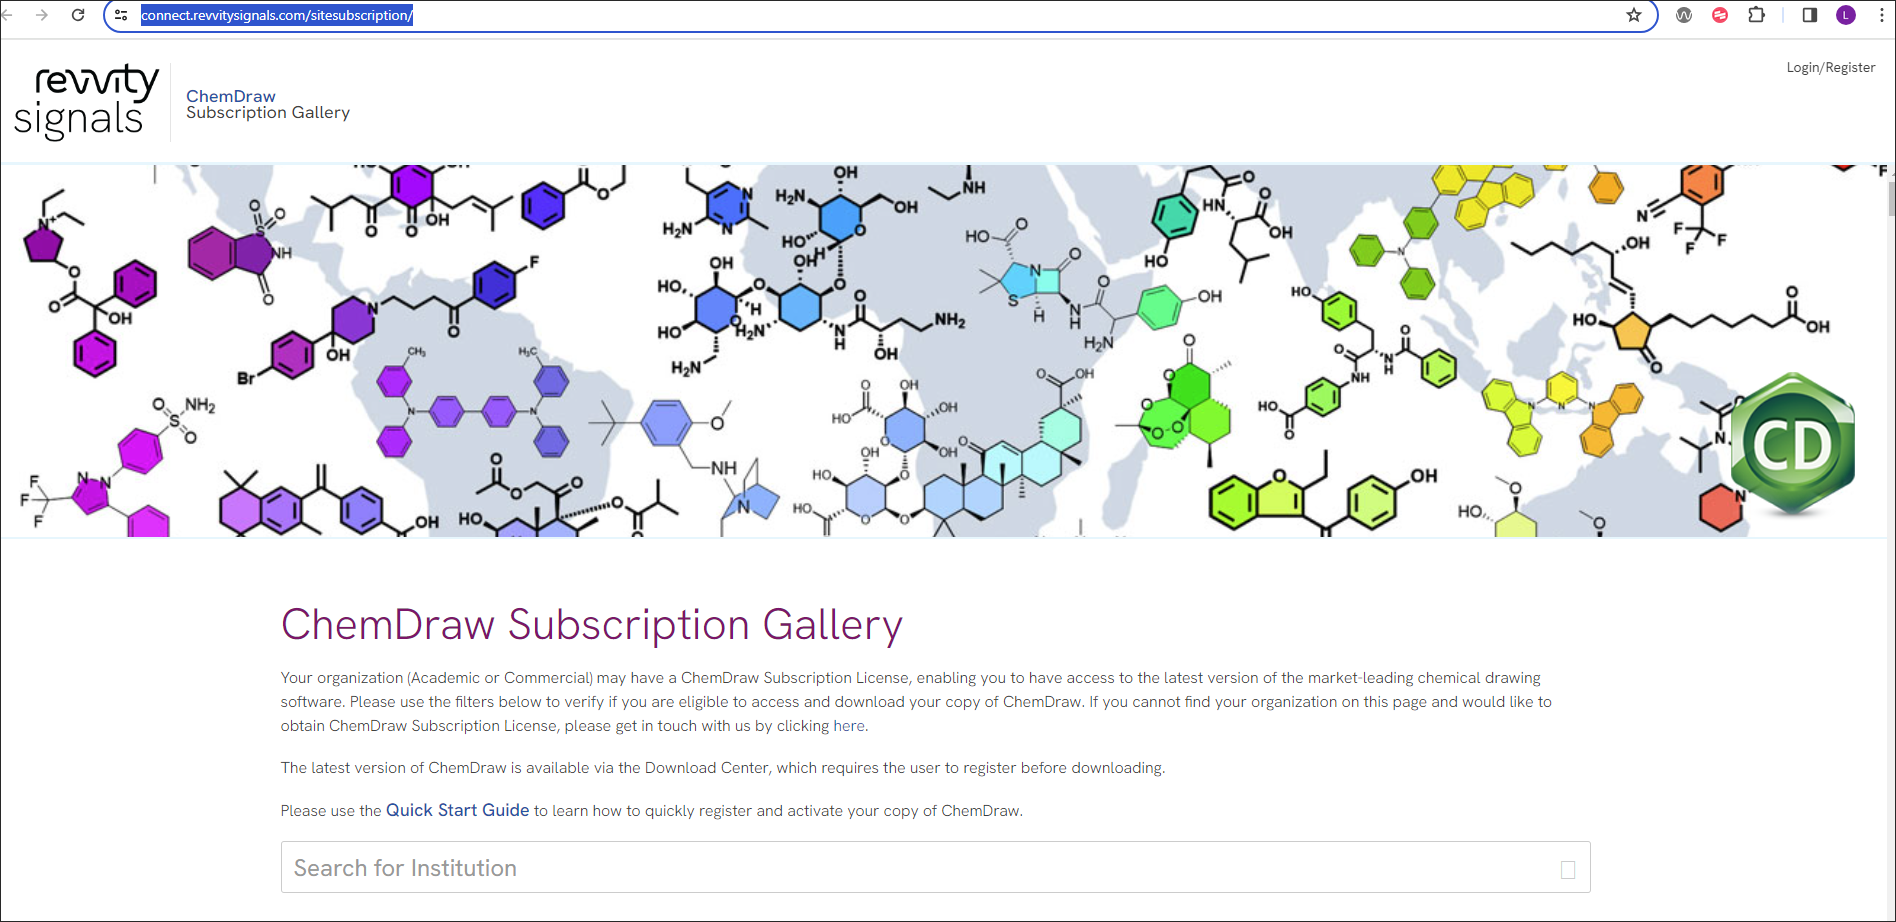 ChemDraw Subscription Gallery Home Page